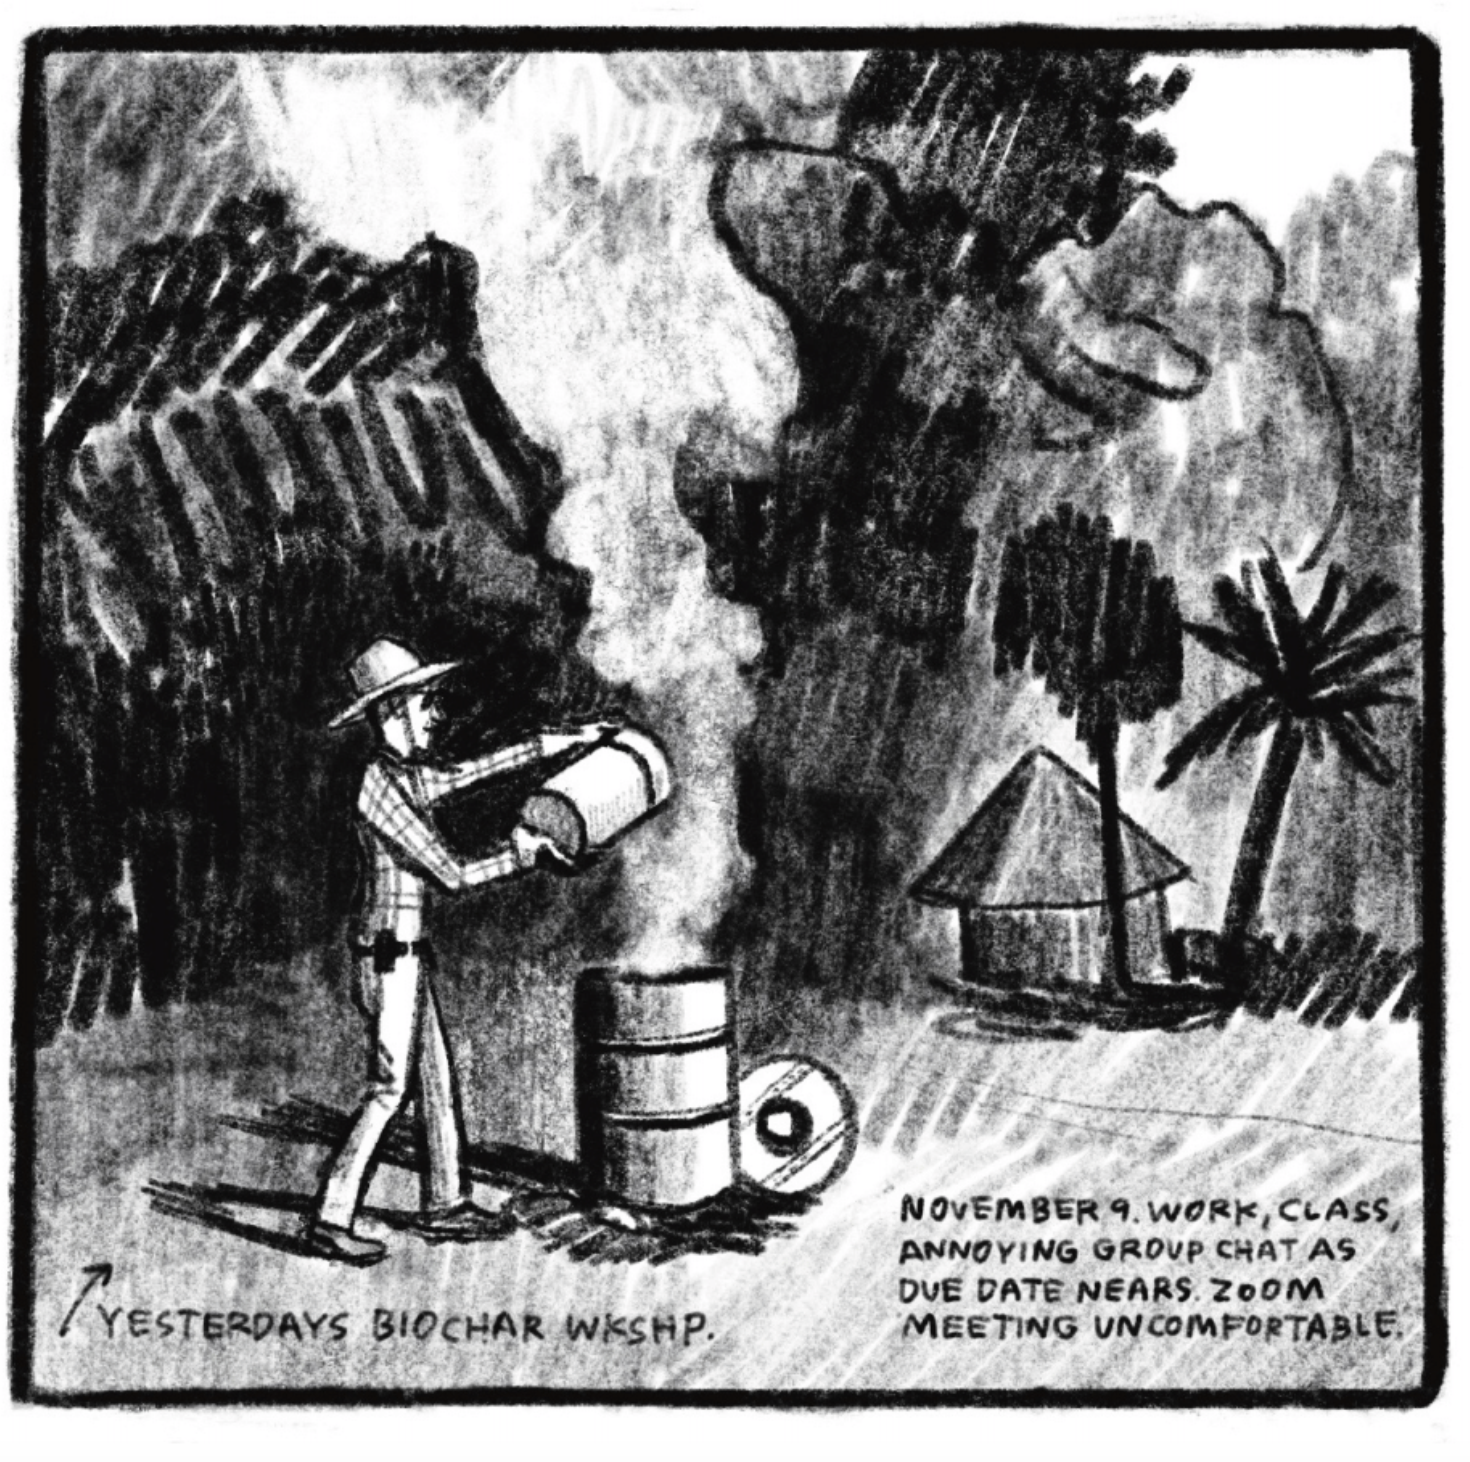 Outside in a field surrounded by trees and a hut-like building off in the distance, a man is pouring something from a canister into a large cylindrical vessel that is blowing off lots of smoke or steam. The man is wearing a safari sunhat, sunglasses, a flannel long-sleeve shirt, and long pants with a walkie-talkie strapped to his belt. Kim identifies the scene as â€œyesterdayâ€™s biochar workshop.â€ She then writes, â€œNovember 9. Work, class, annoying group chat as due date nears. Zoom meeting uncomfortable.â€